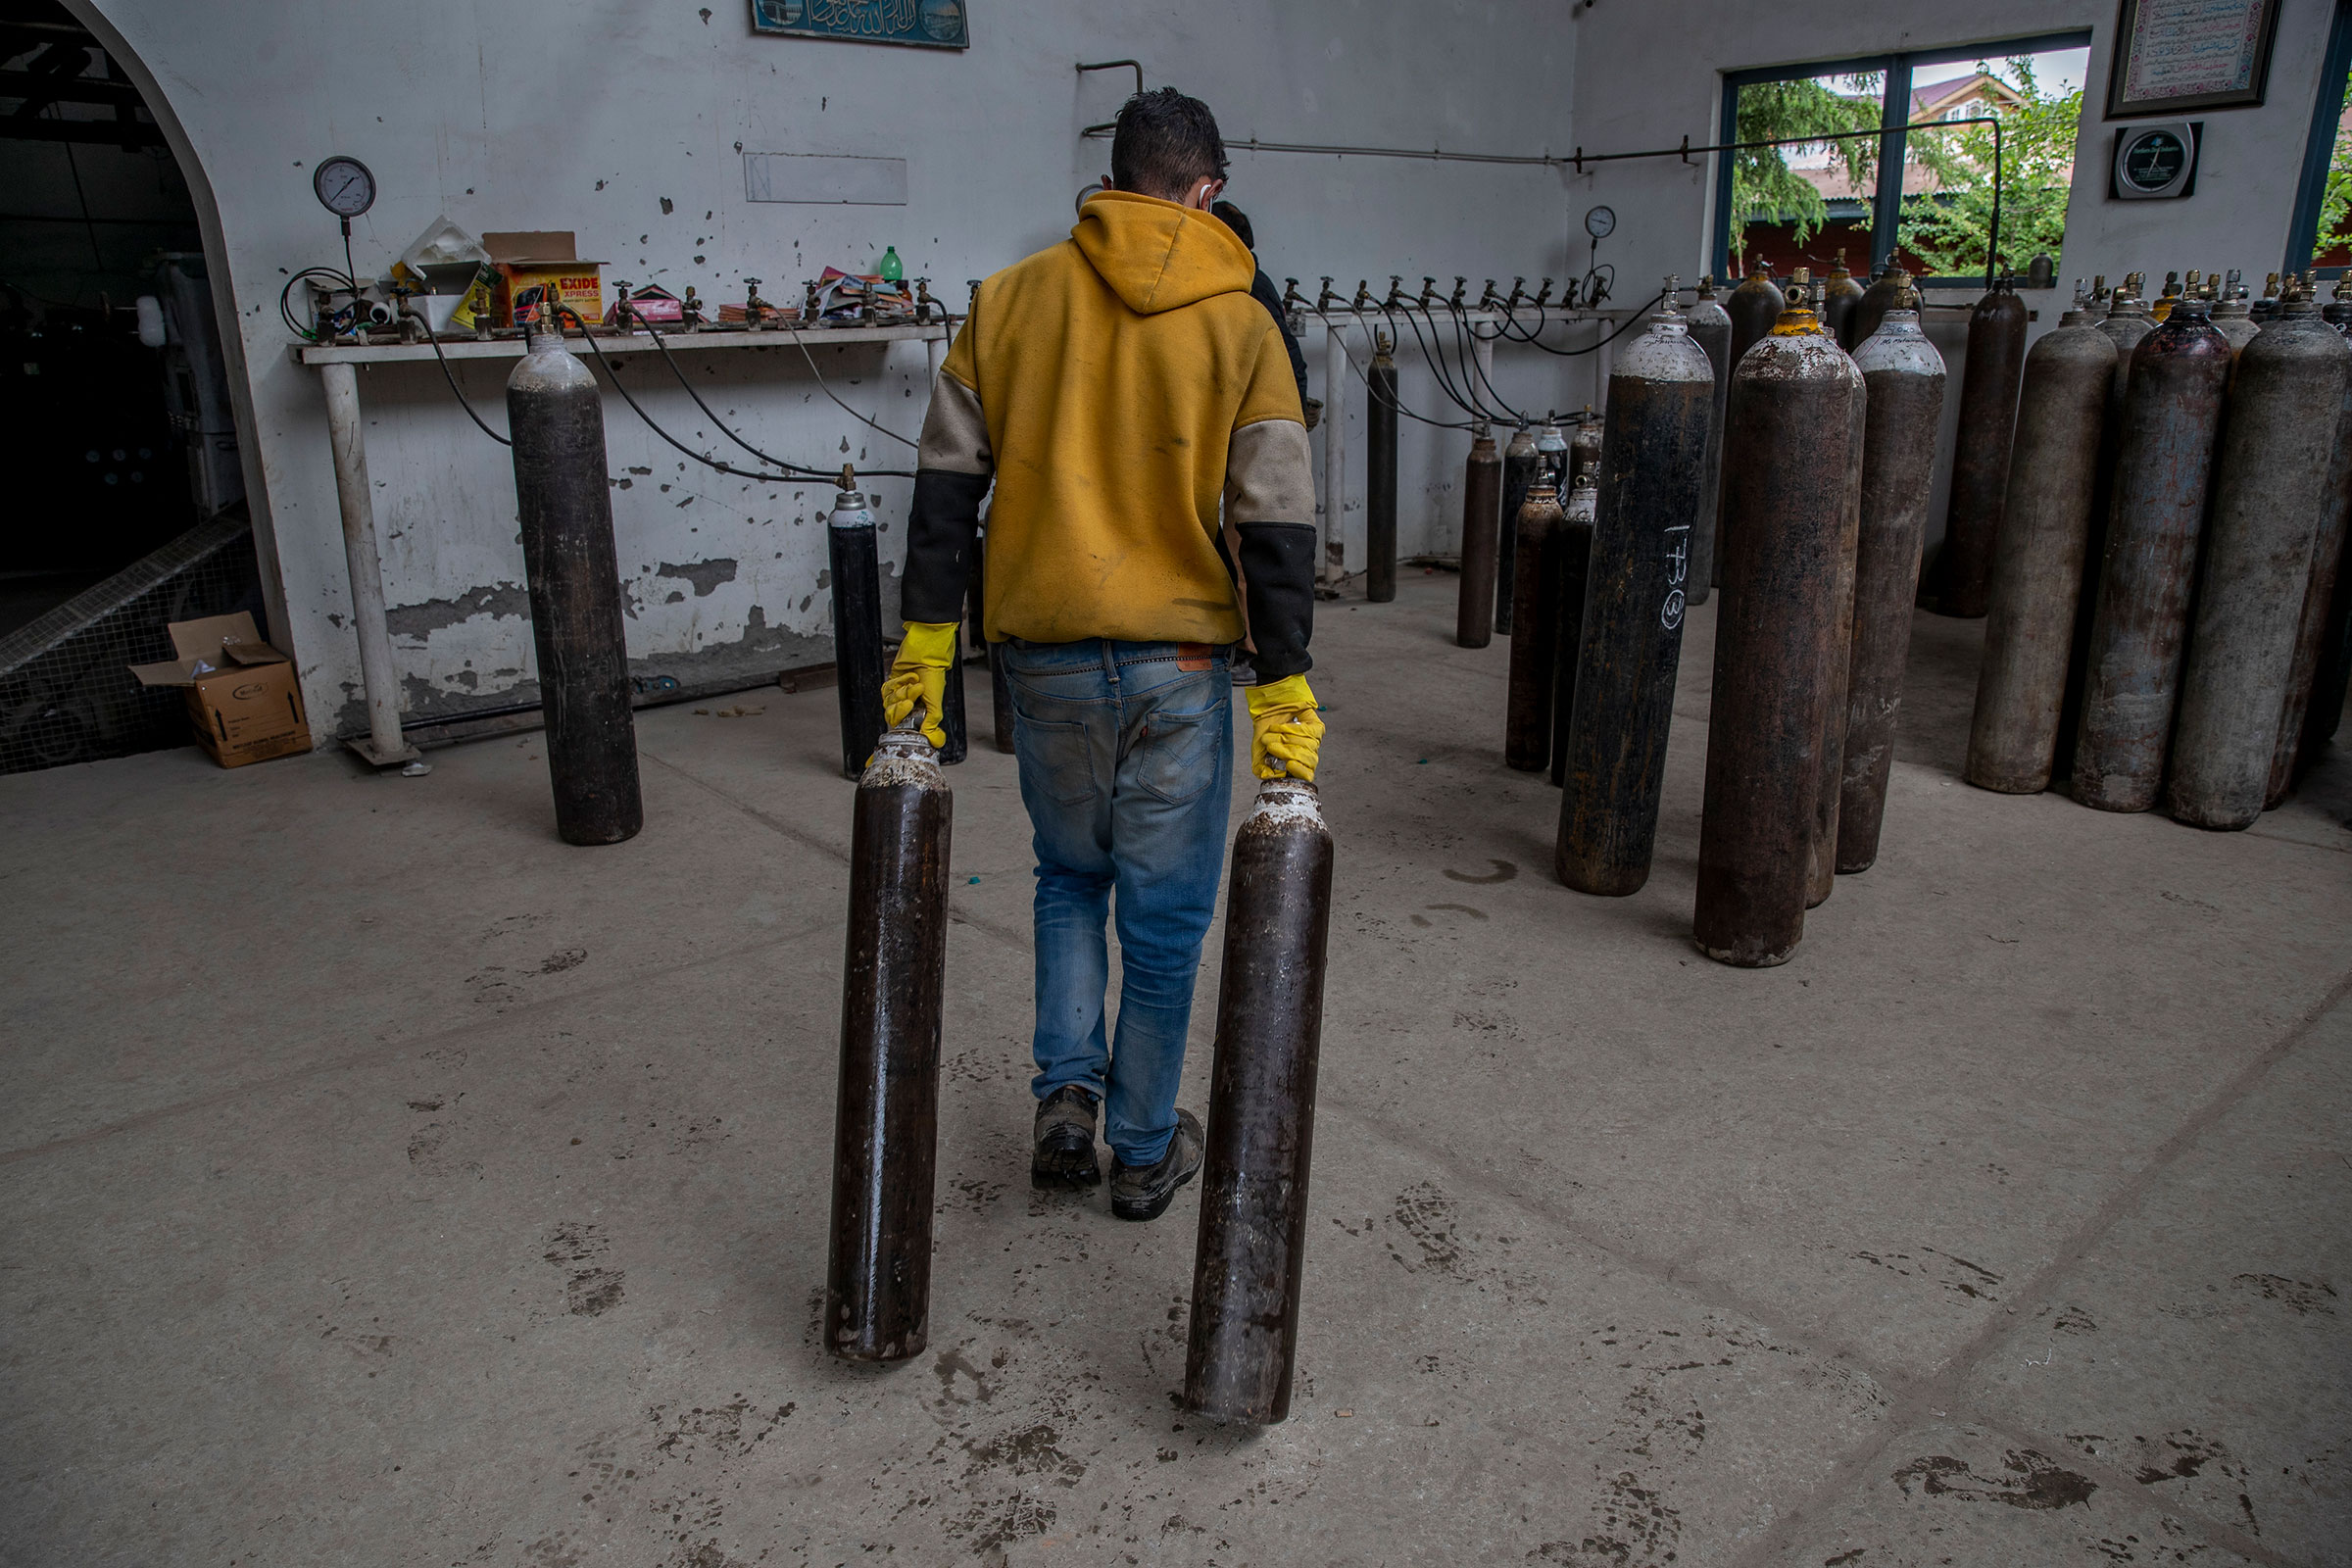 A worker moves empty oxygen cylinders for refilling at a gas supplier facility in Srinagar on May 11, 2021.